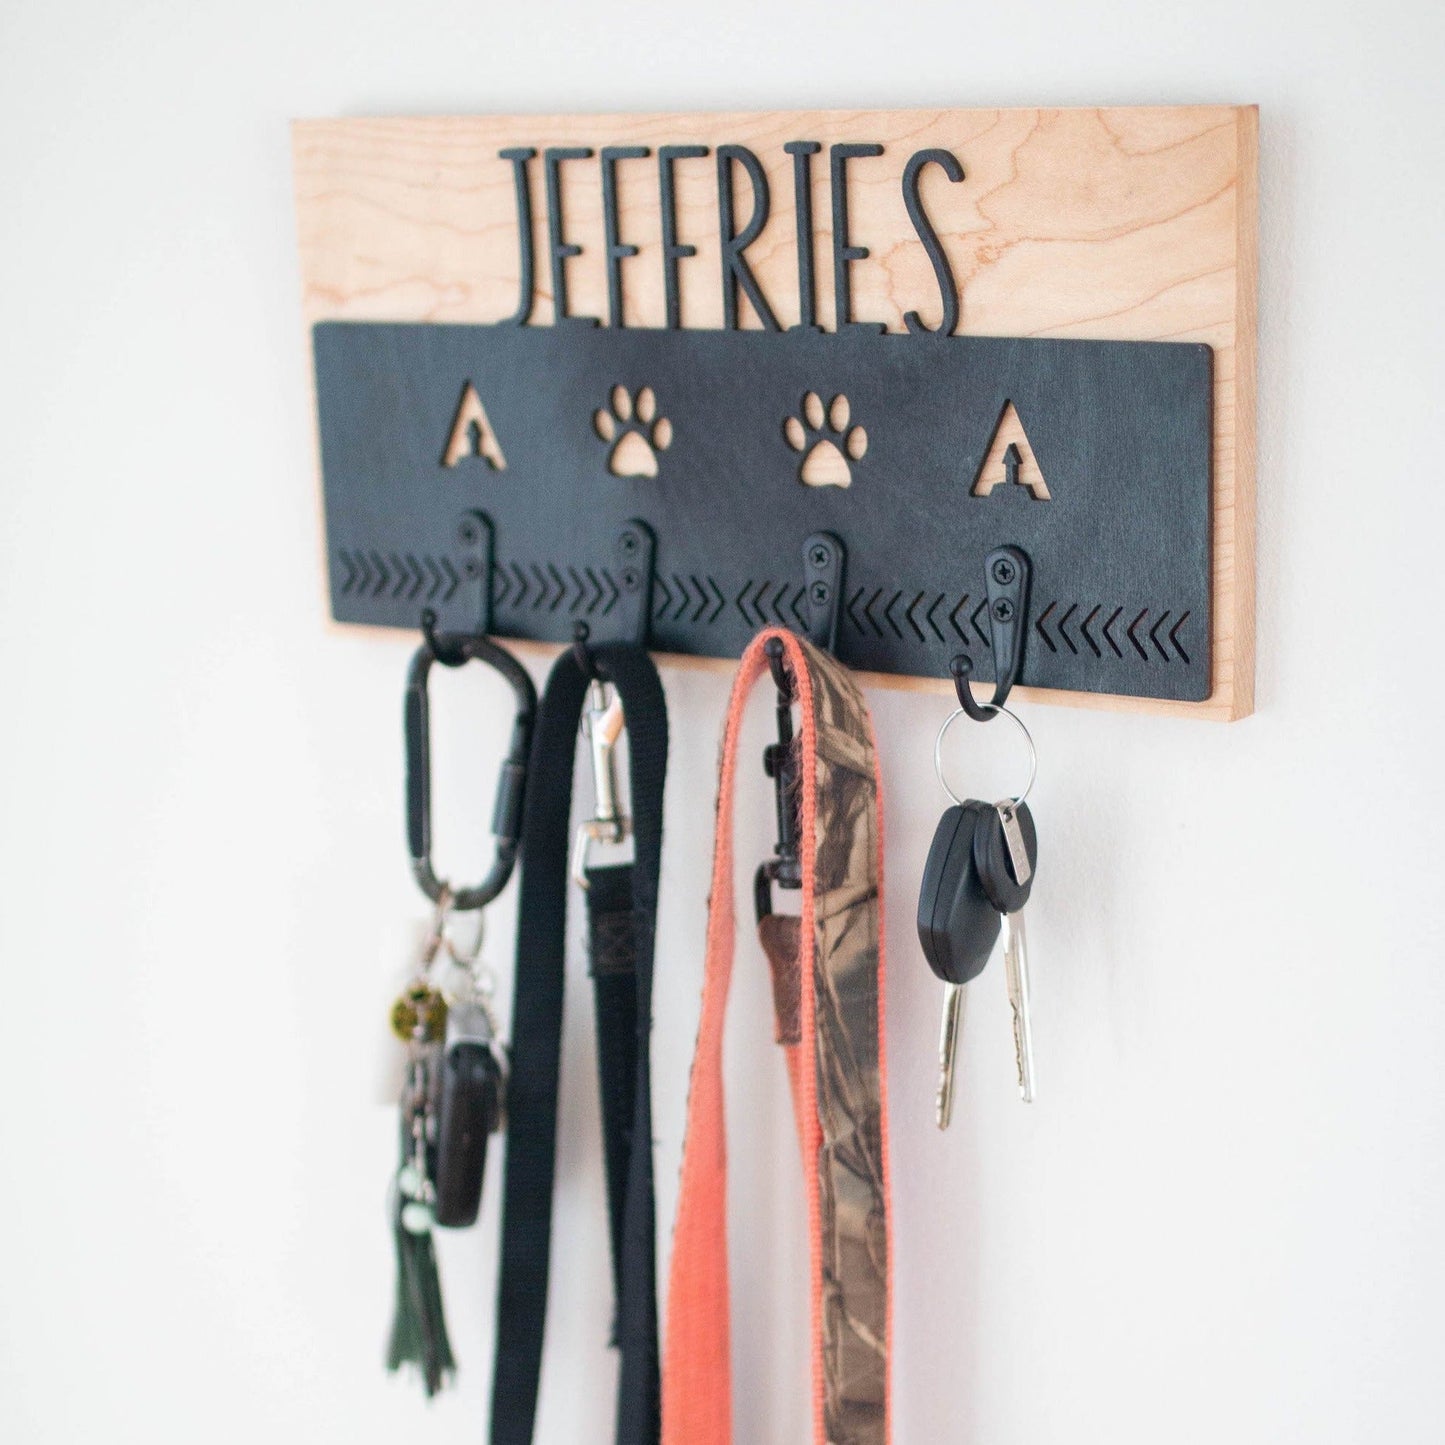 Personalized Key & Leash Holder - Laser Cut Wood with custom initials and name mounted on hardwood - by LeeMo Designs in Bend, Oregon